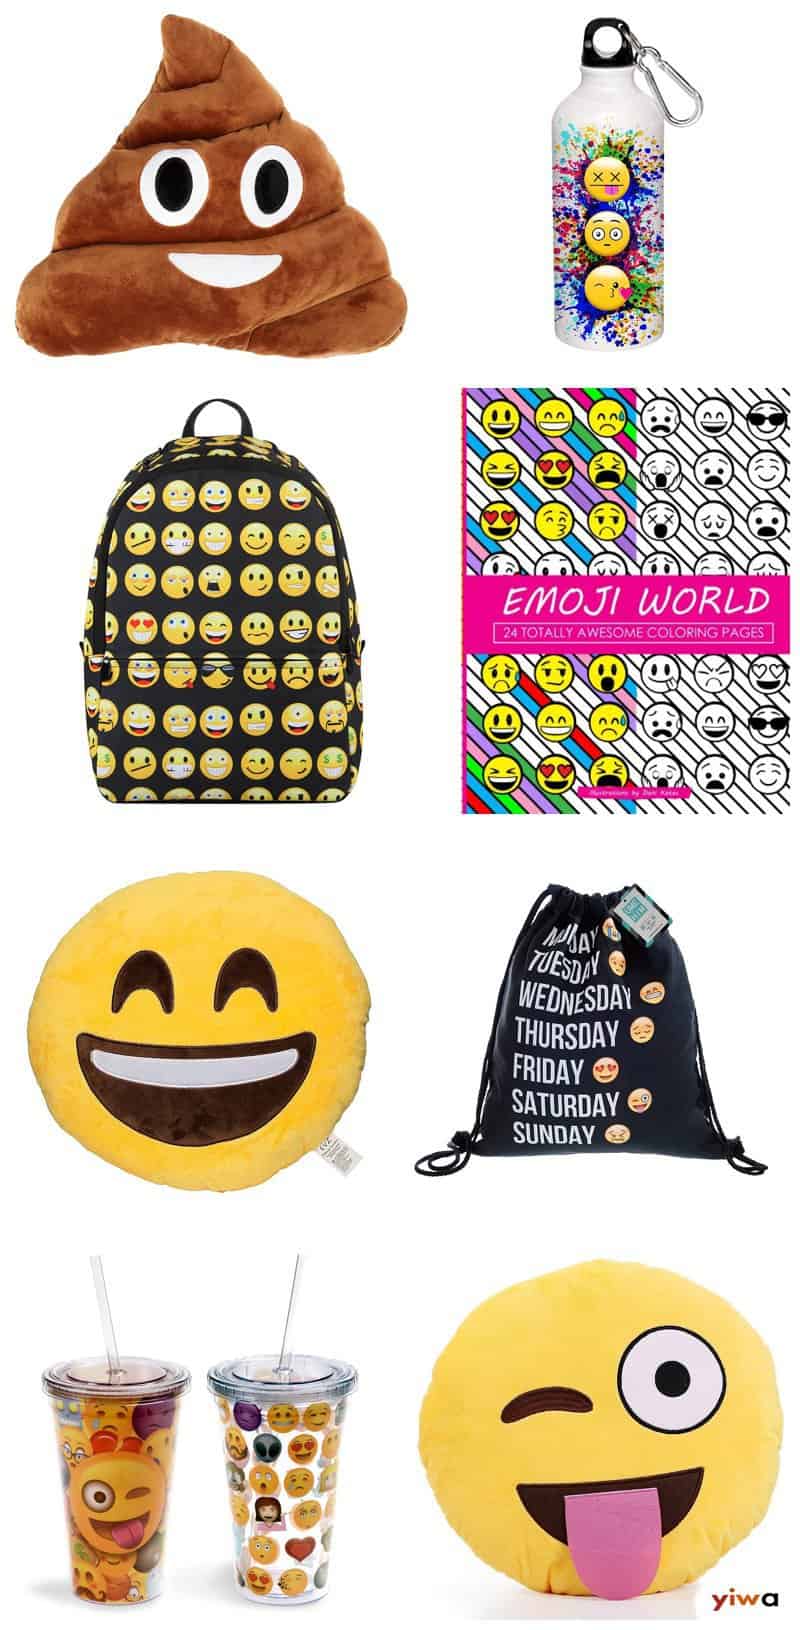 Awesome Emoji Gift Ideas for Tweens *This stuff cracks me up